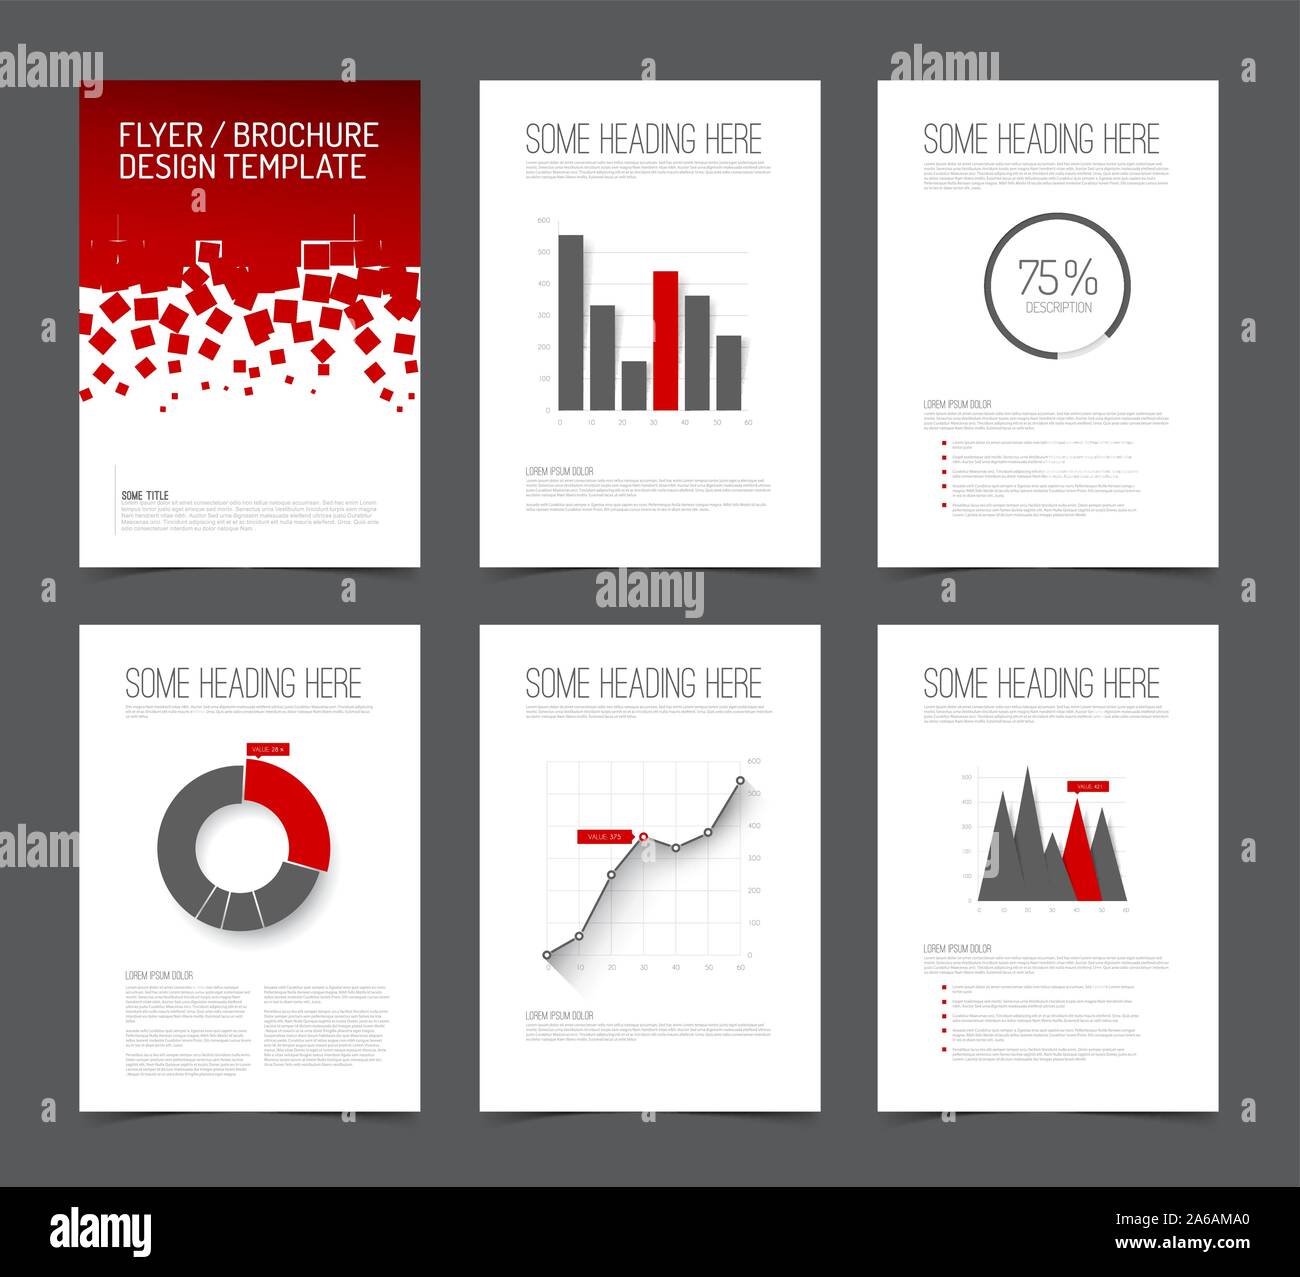 Set Of Modern Brochure Flyer Design Templates With Graphs Charts And Other Infographic Elements Red And Gray Version Stock Vector Image Art Alamy